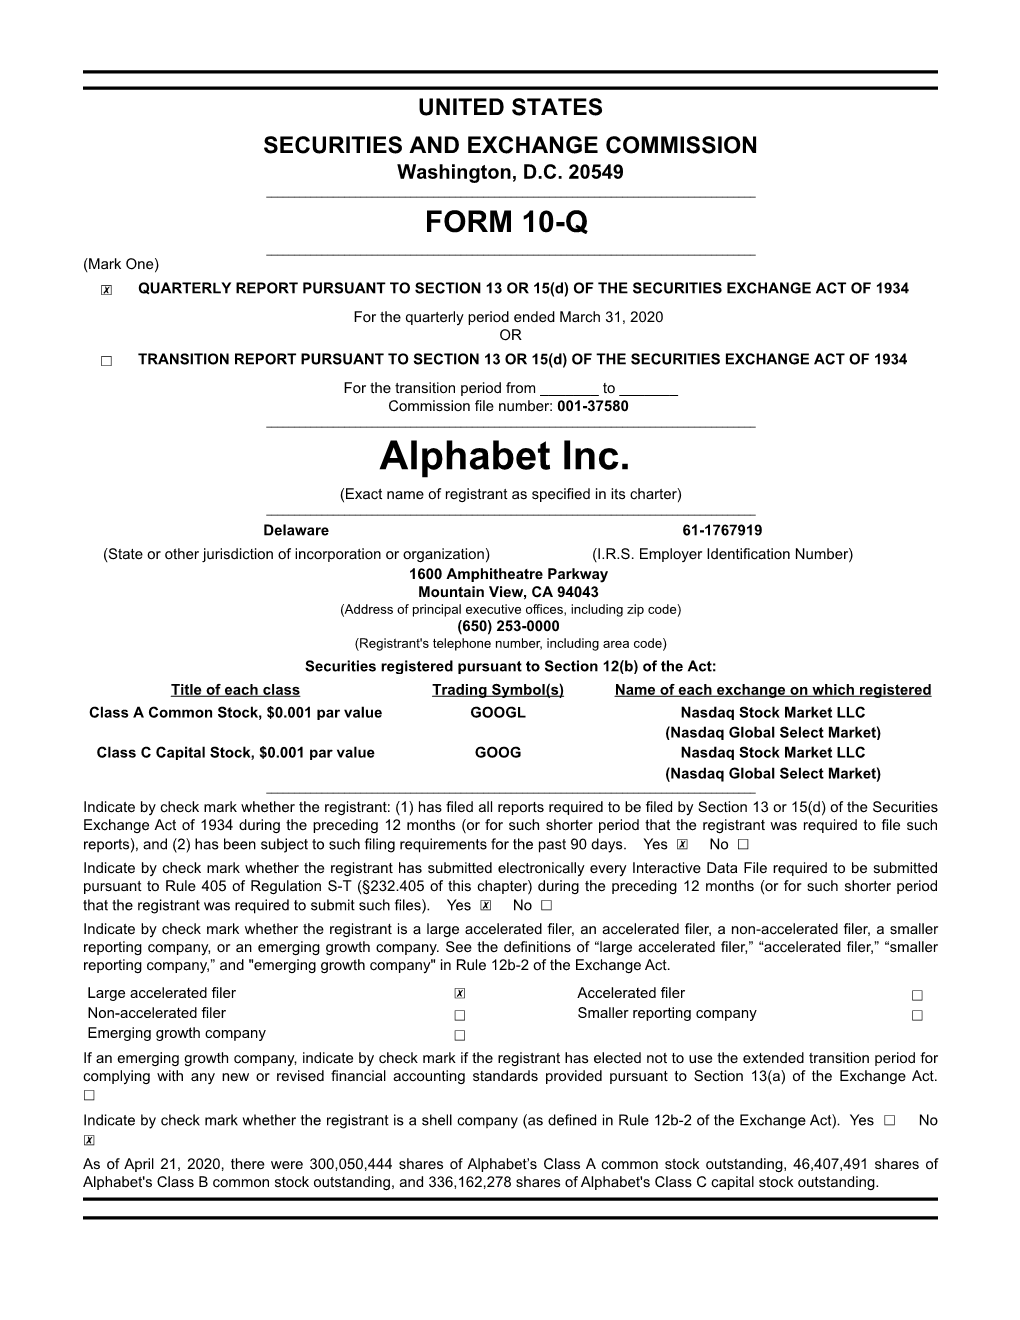 Alphabet Inc. (Exact Name of Registrant As Specified in Its Charter) ______Delaware 61-1767919 (State Or Other Jurisdiction of Incorporation Or Organization) (I.R.S